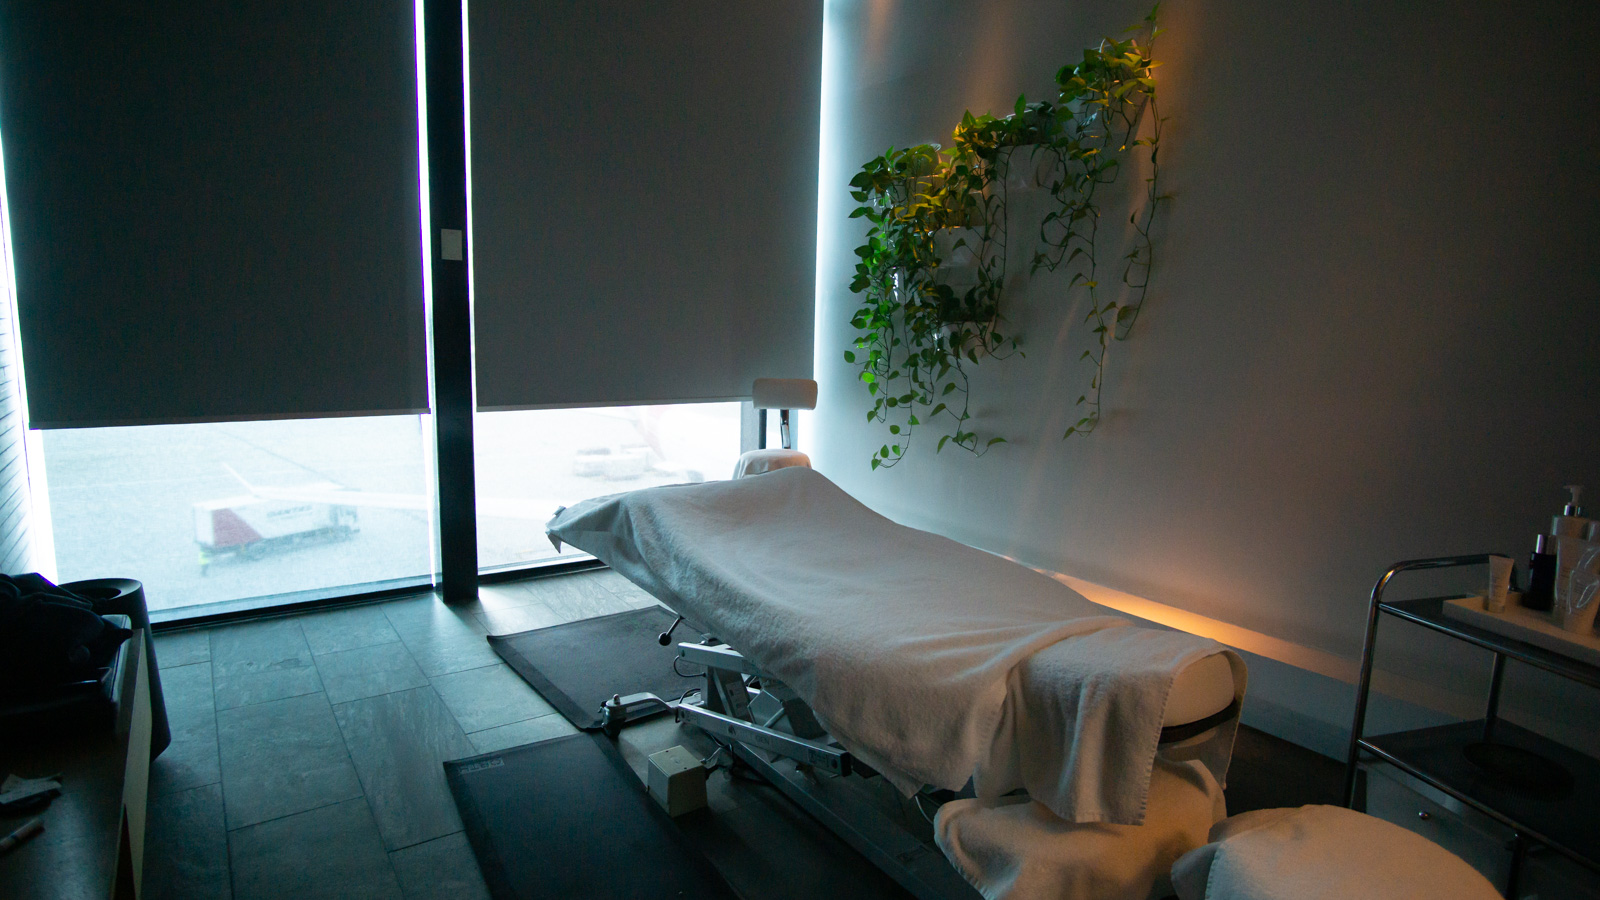 Views from the Qantas First Lounge spa in Melbourne